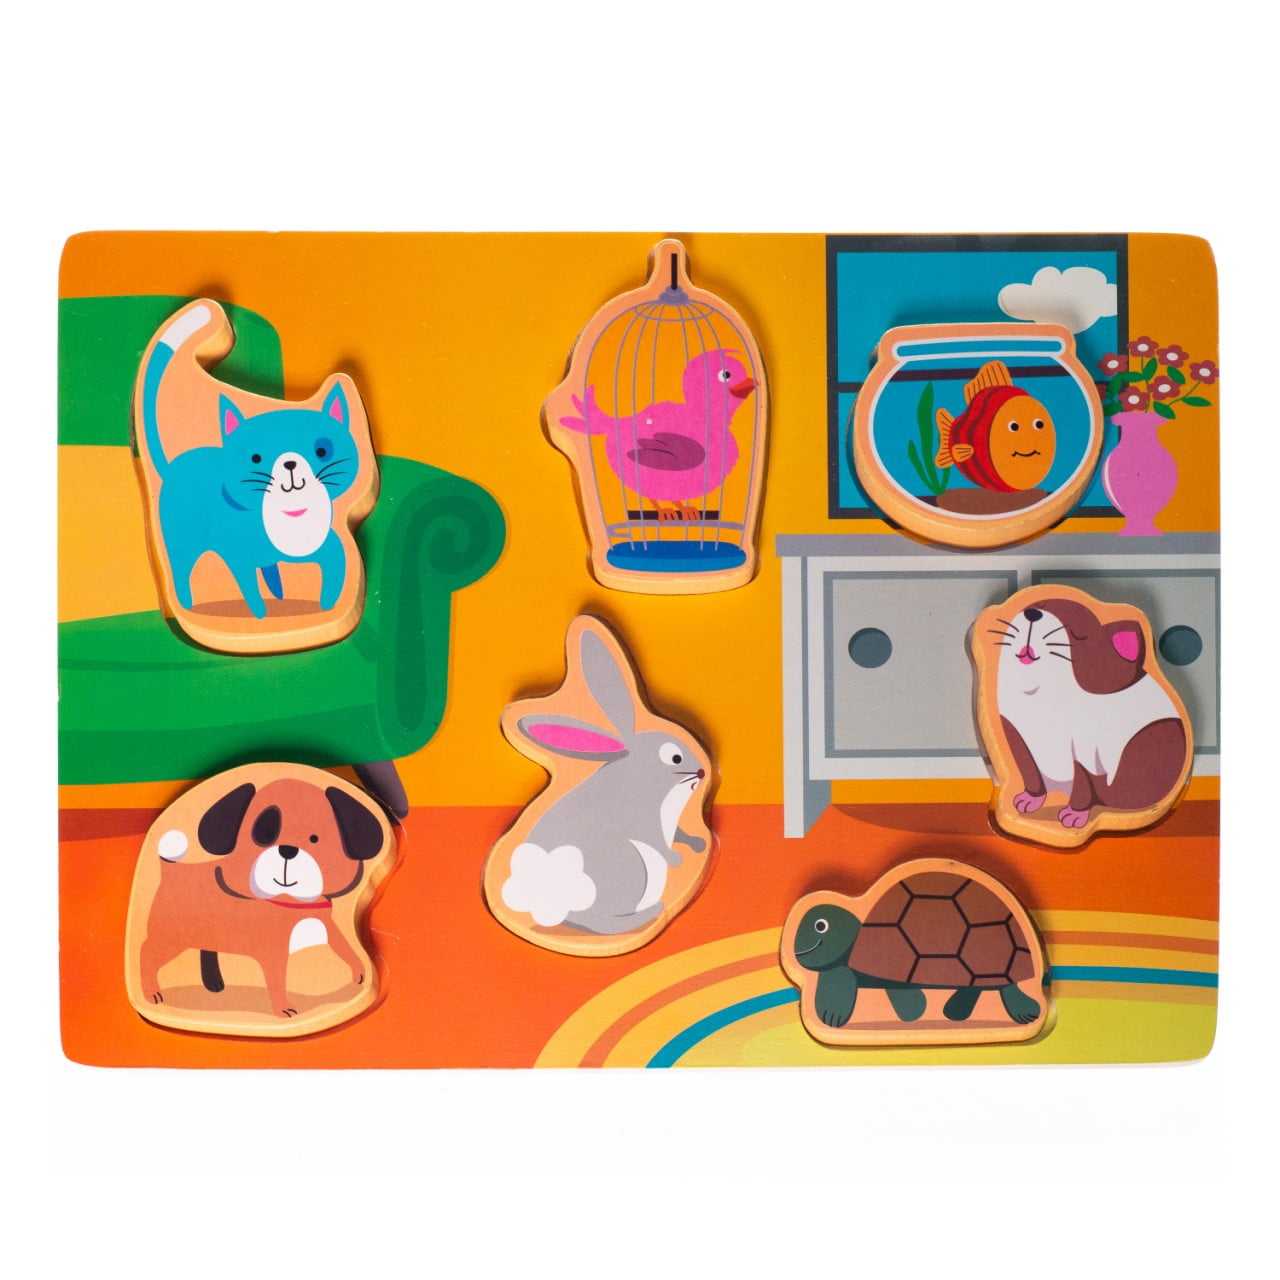 Eliiti Wooden Farm Animals Jigsaw Puzzle for Toddlers 2 to 4 Years Old Boy Girl 